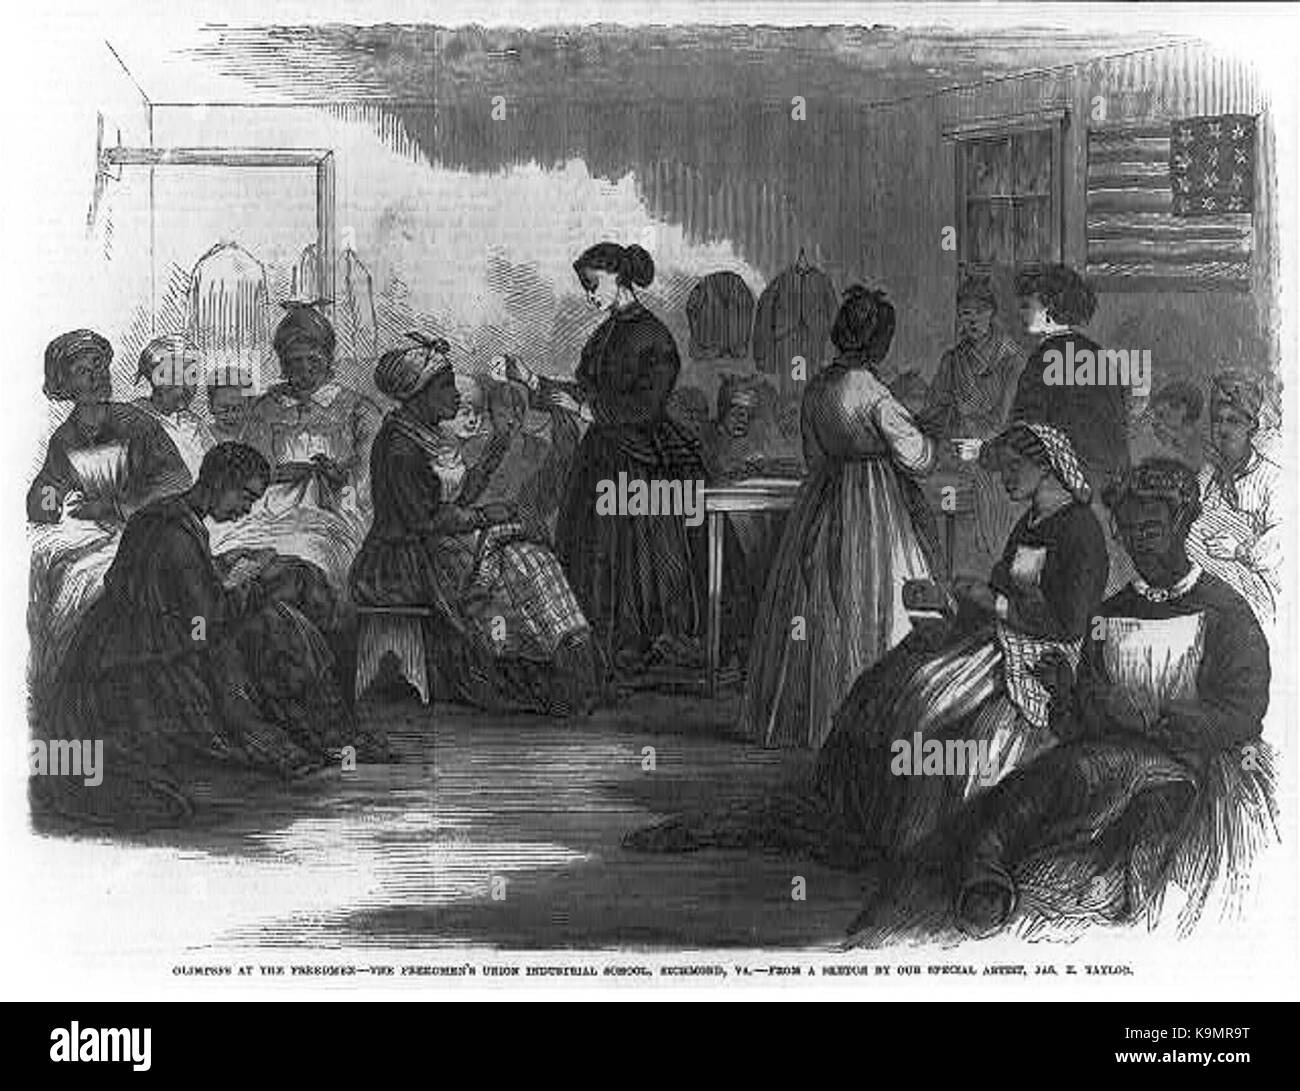 Northern teachers traveled into the South to provide education and training for the newly freed population. Stock Photo